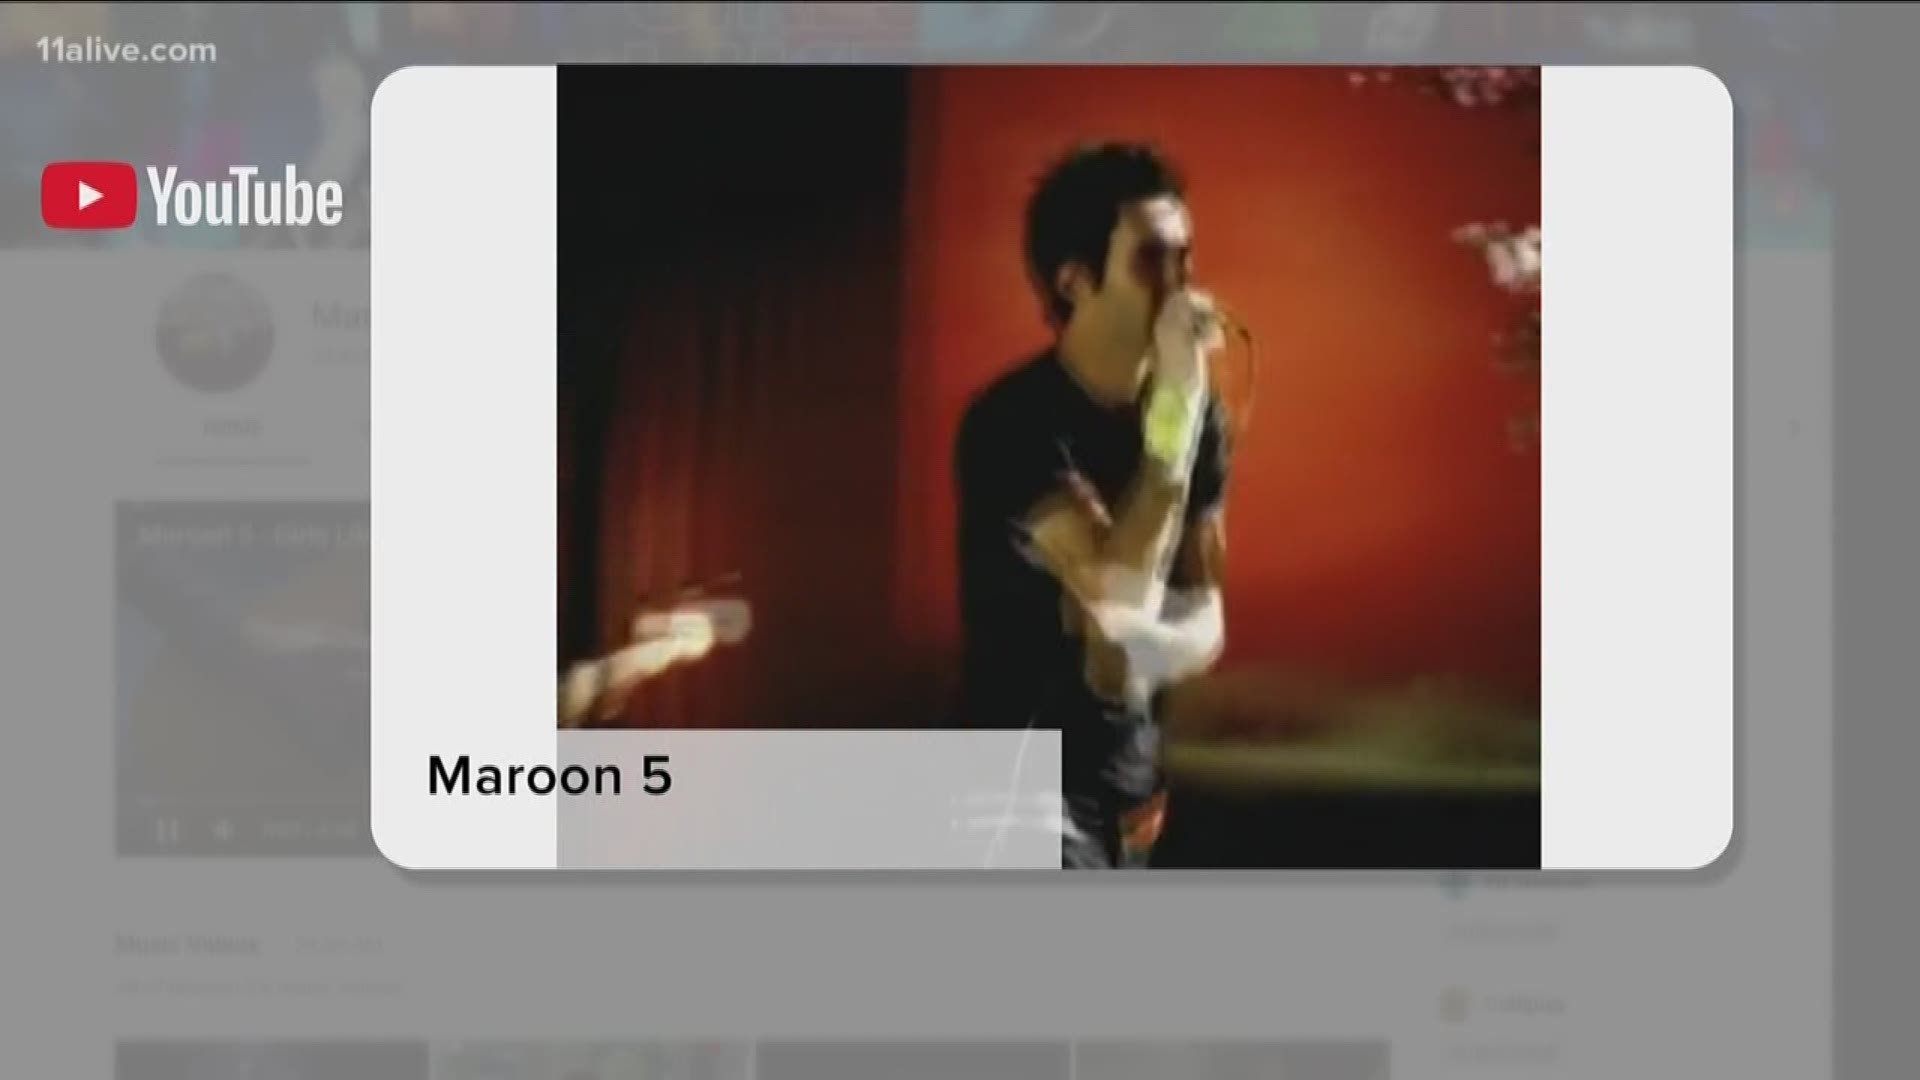 In a statement from the NFL, a planned news conference with Maroon 5 has been canceled.